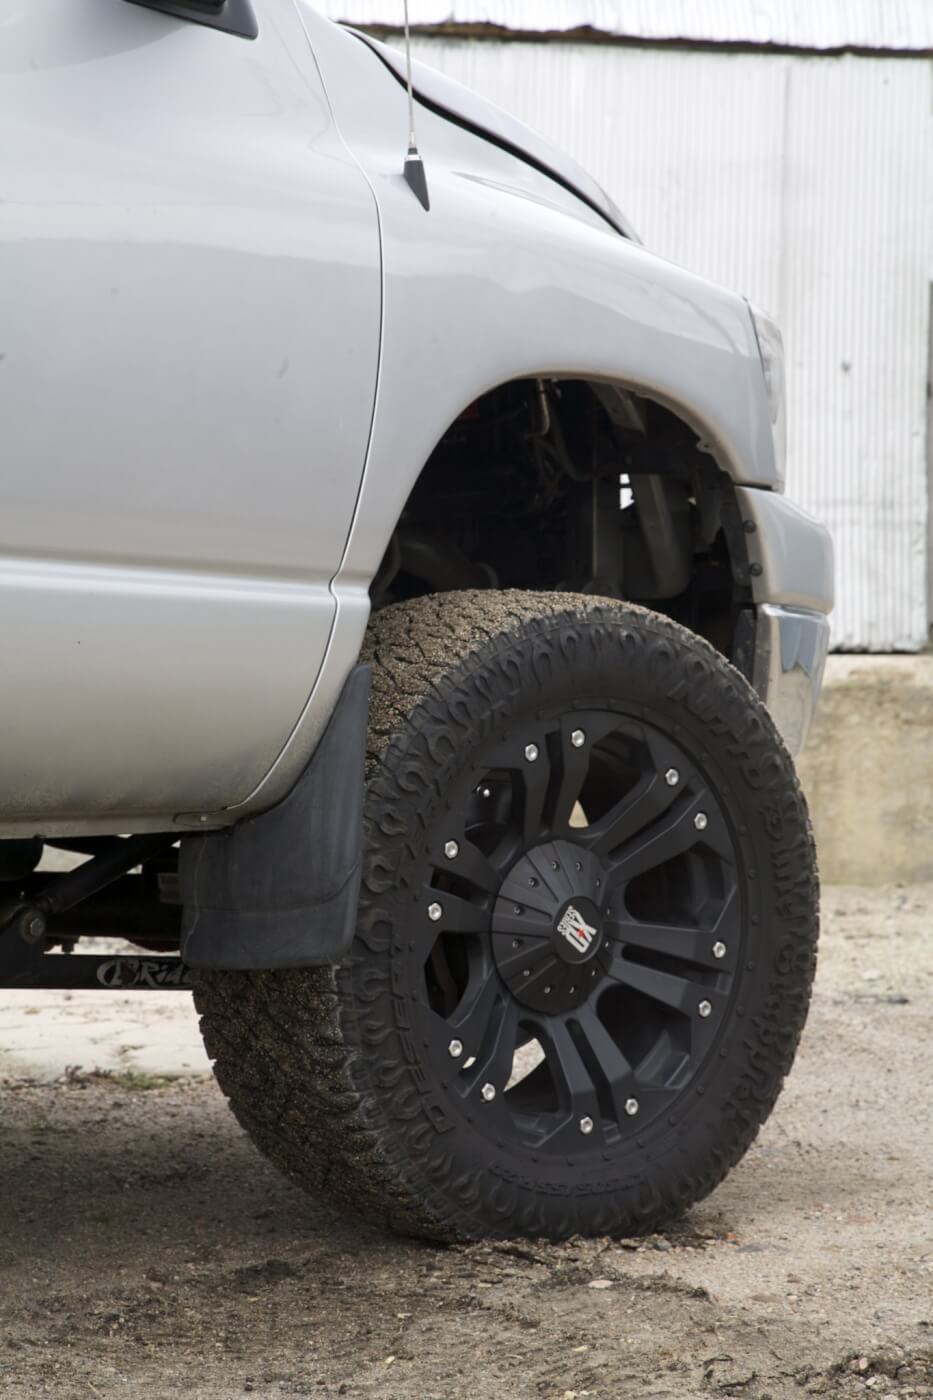 The rubber meets the road with 305/55/R20 Nitto Dune Grapplers wrapped around XD Monster rims. At the rate Geiger is laying down thick black strips of burnt rubber all over Weld County, those Grapplers have likely been replaced by now.